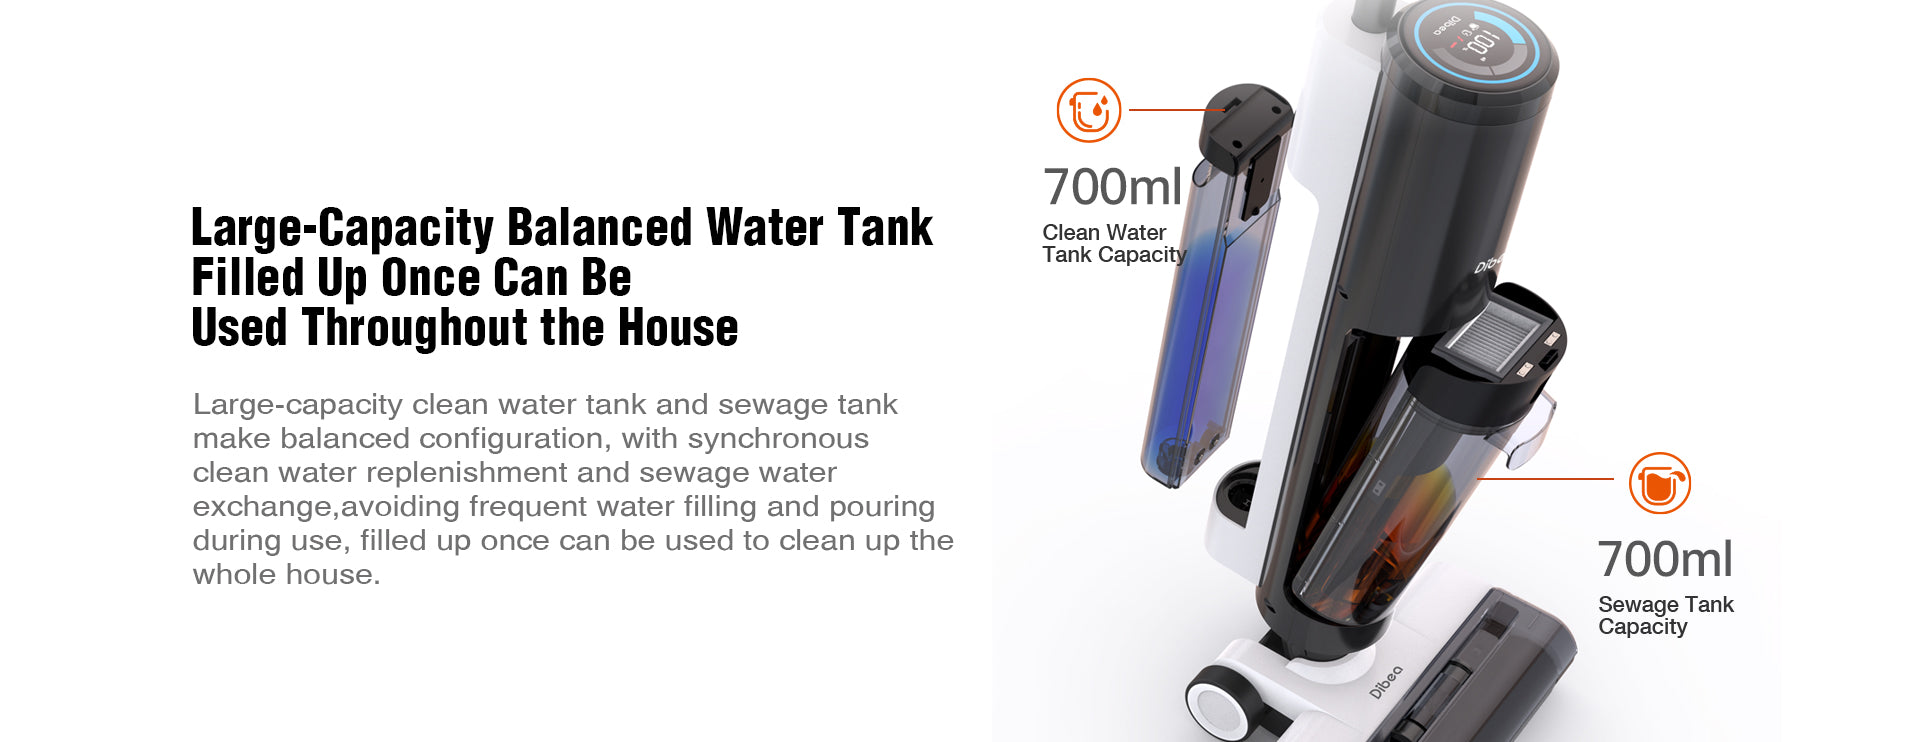 Large-Capacity_Balanced_Water_TankFilled_Up_Once_Can_BeUsed_Throughout_the_House